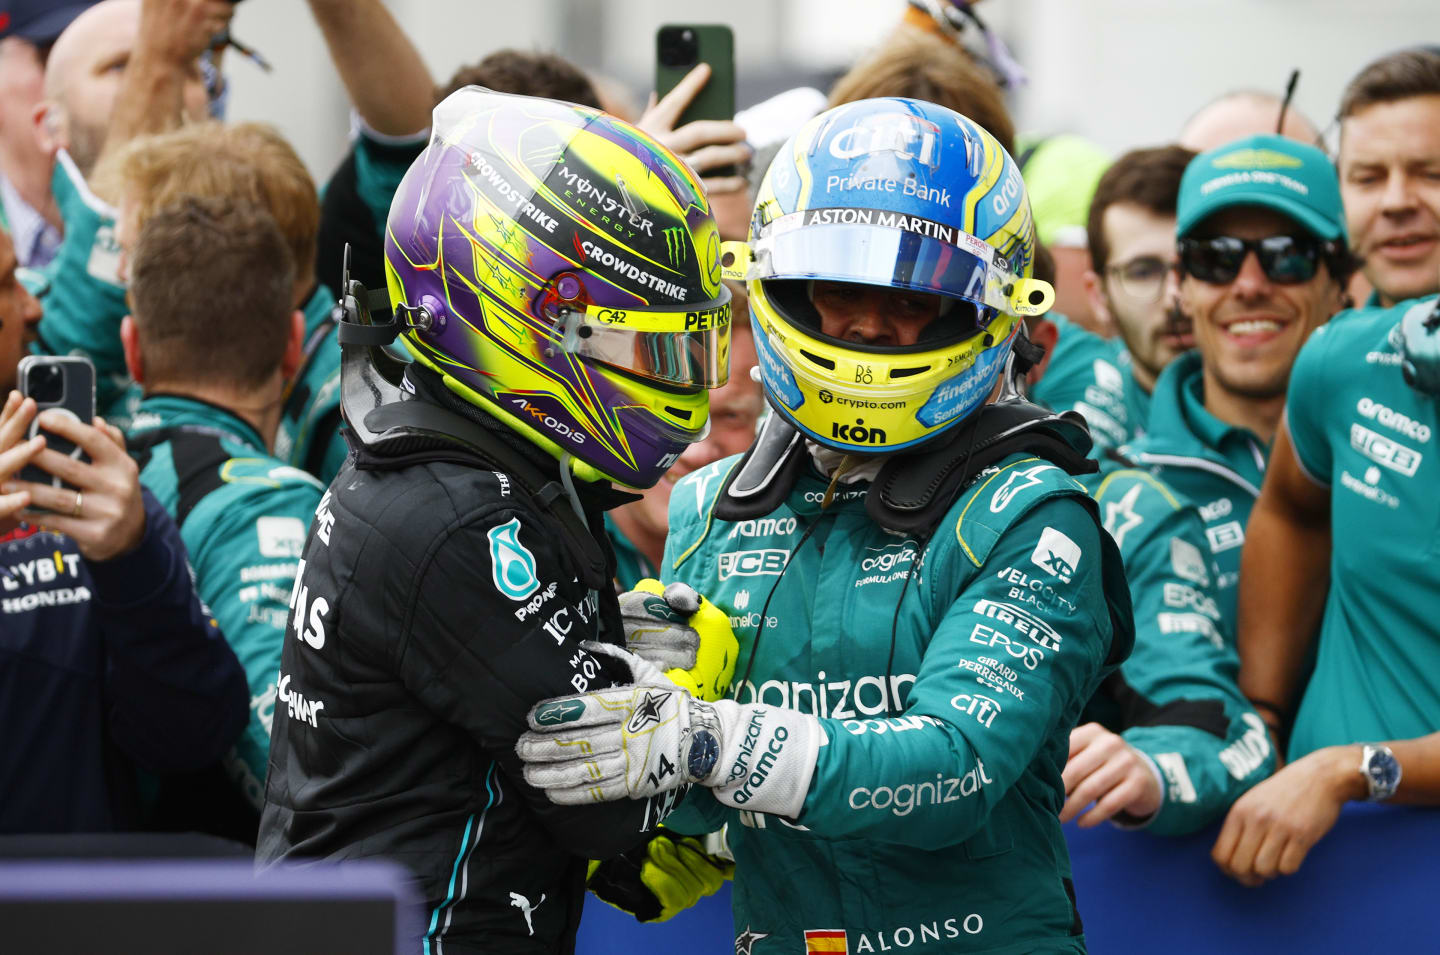 MONTREAL, QUEBEC - JUNE 18: Second placed Fernando Alonso of Spain and Aston Martin F1 Team and Third placed Lewis Hamilton of Great Britain and Mercedes celebrate in parc ferme during the F1 Grand Prix of Canada at Circuit Gilles Villeneuve on June 18, 2023 in Montreal, Quebec. (Photo by Jared C. Tilton/Getty Images)